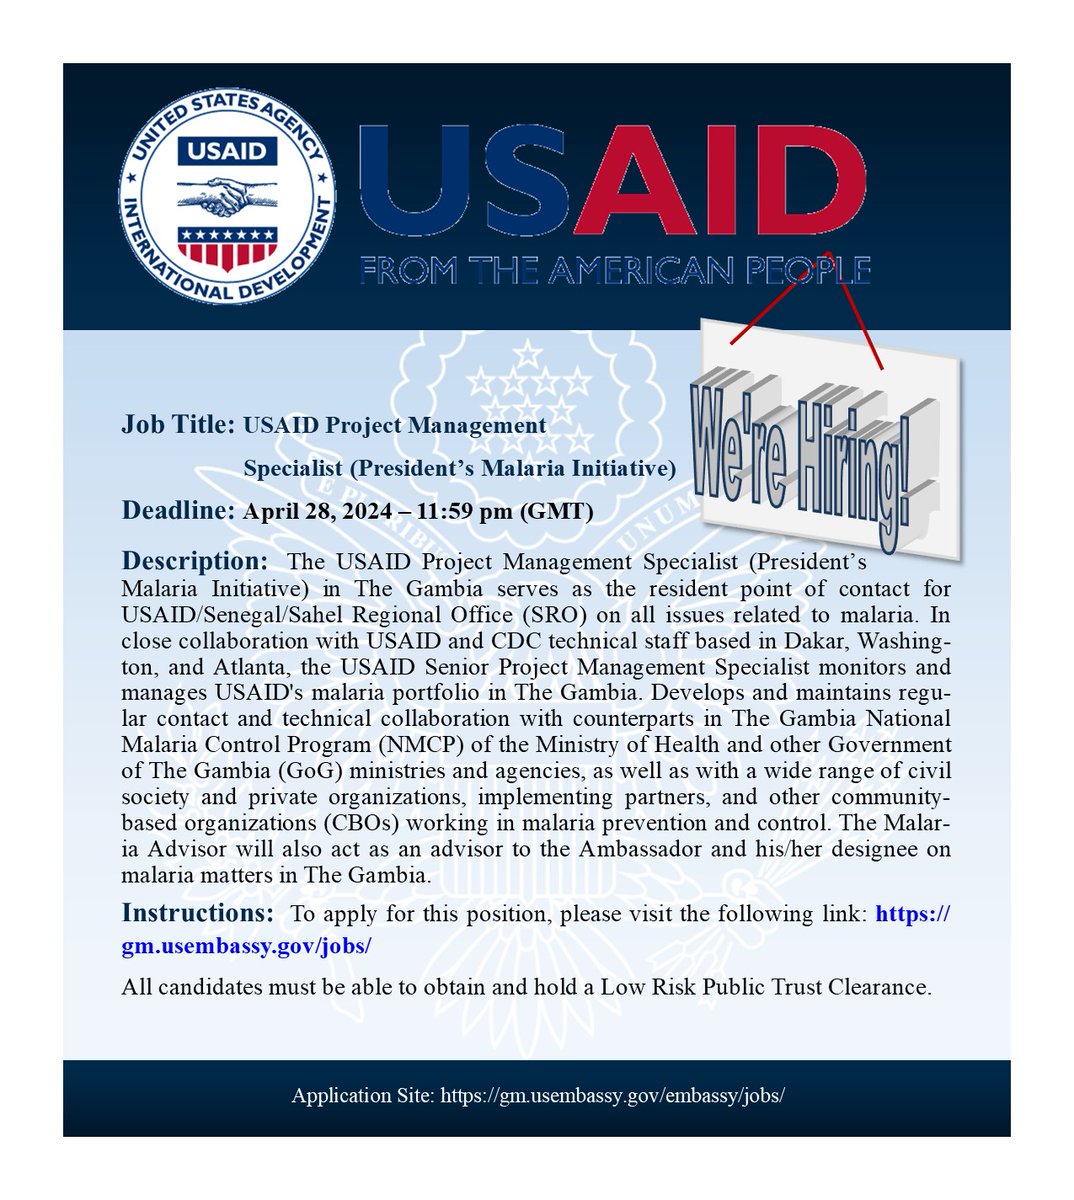 We are seeking a USAID Project Management Specialist for the President’s Malaria Initiative (PMI) in The Gambia, serving as the key contact for USAID/Senegal/Sahel Regional Office on malaria-related issues. Collaborating closely with USAID and CDC staff, the Specialist oversees…